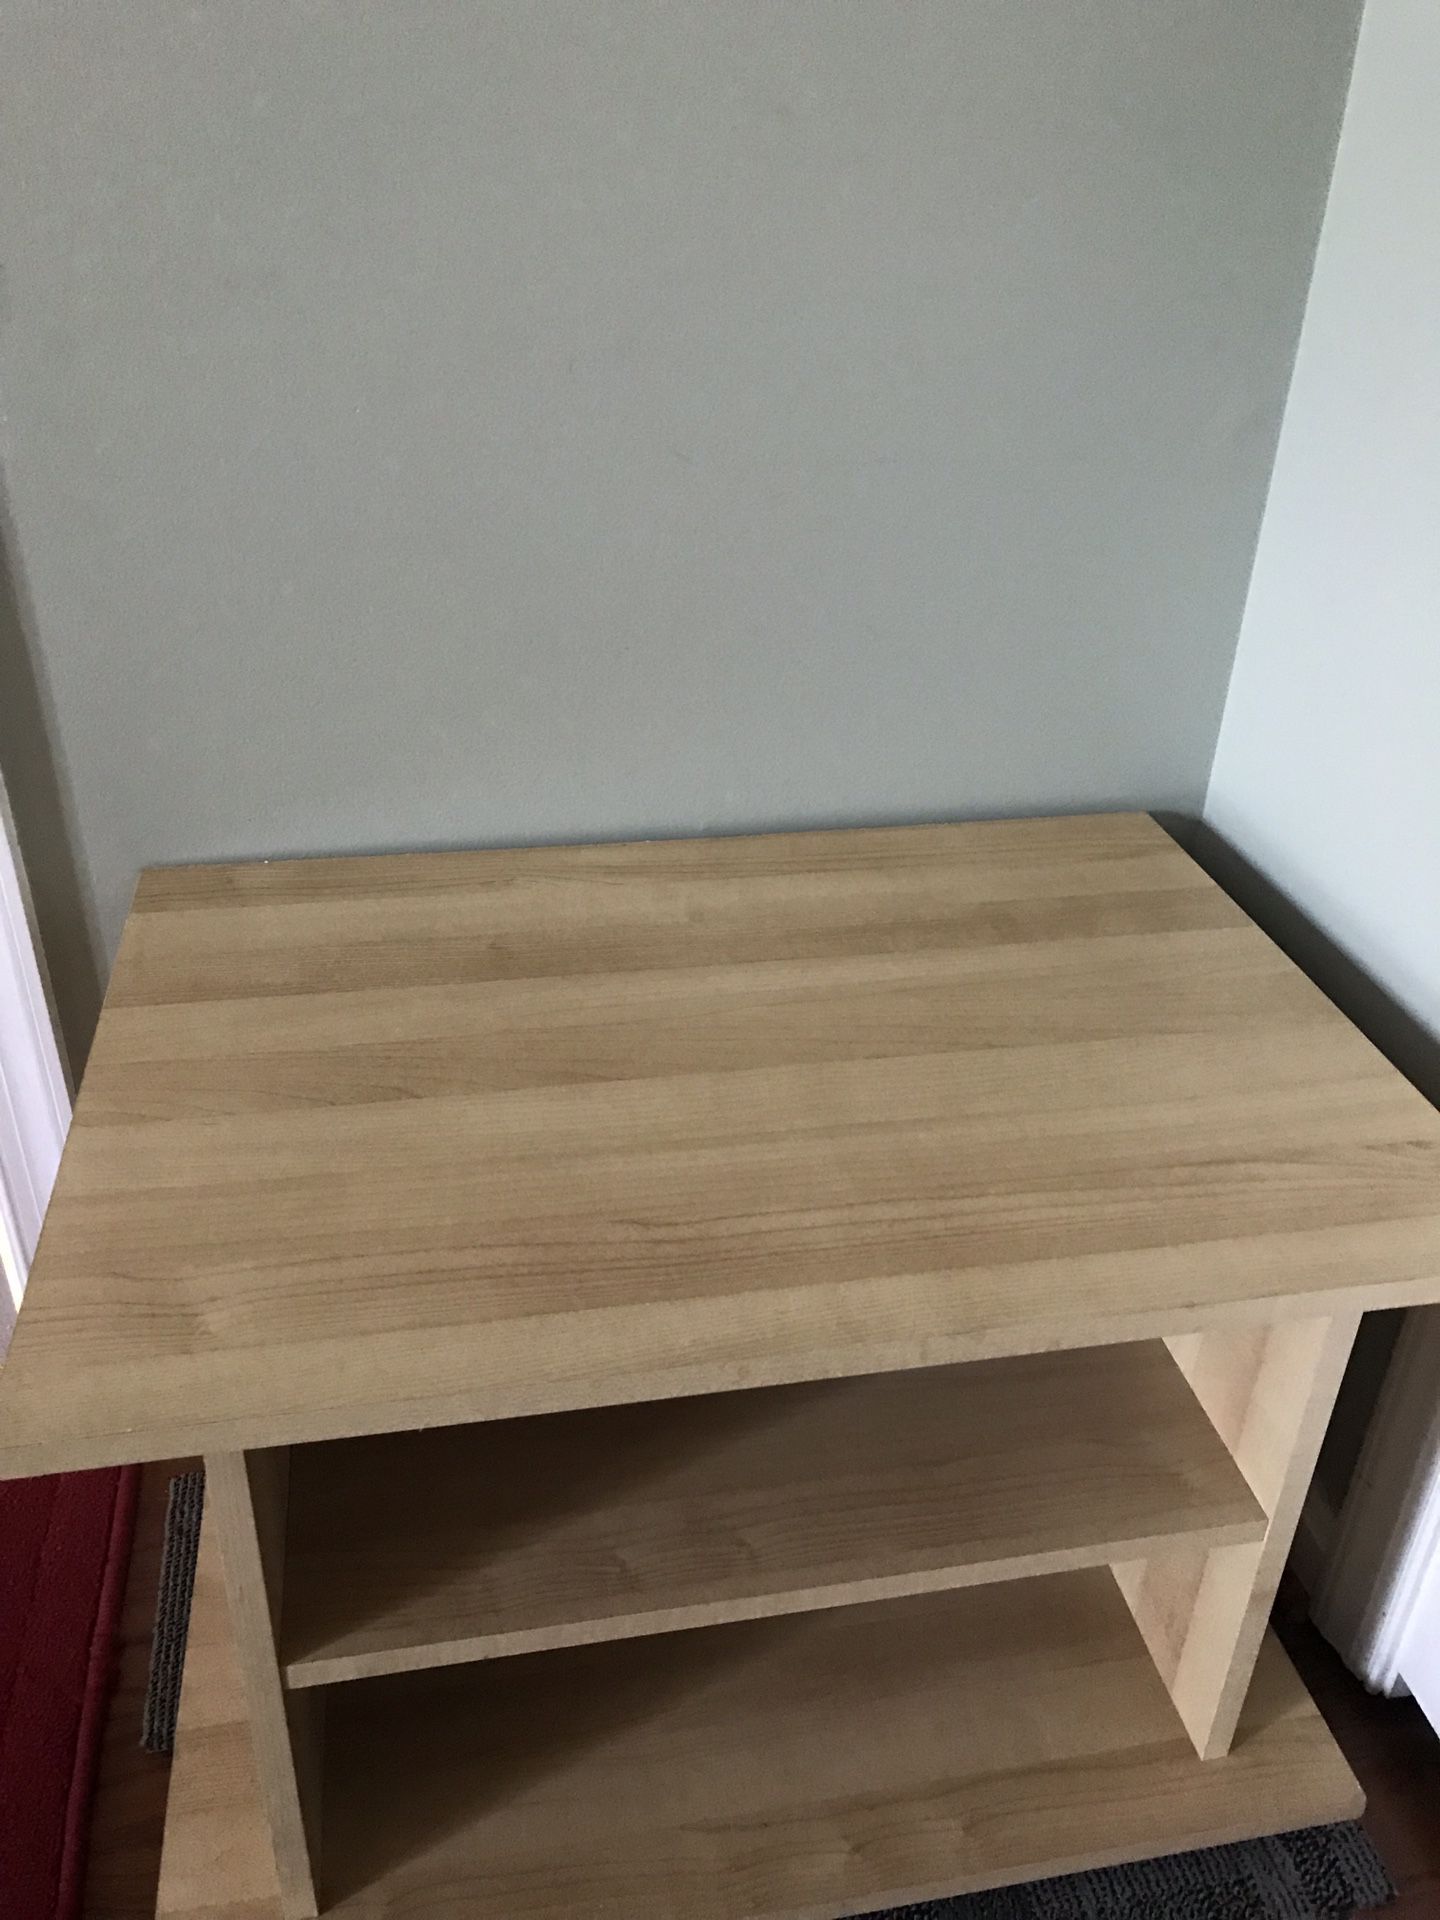 World market Office / side table (moving sale)